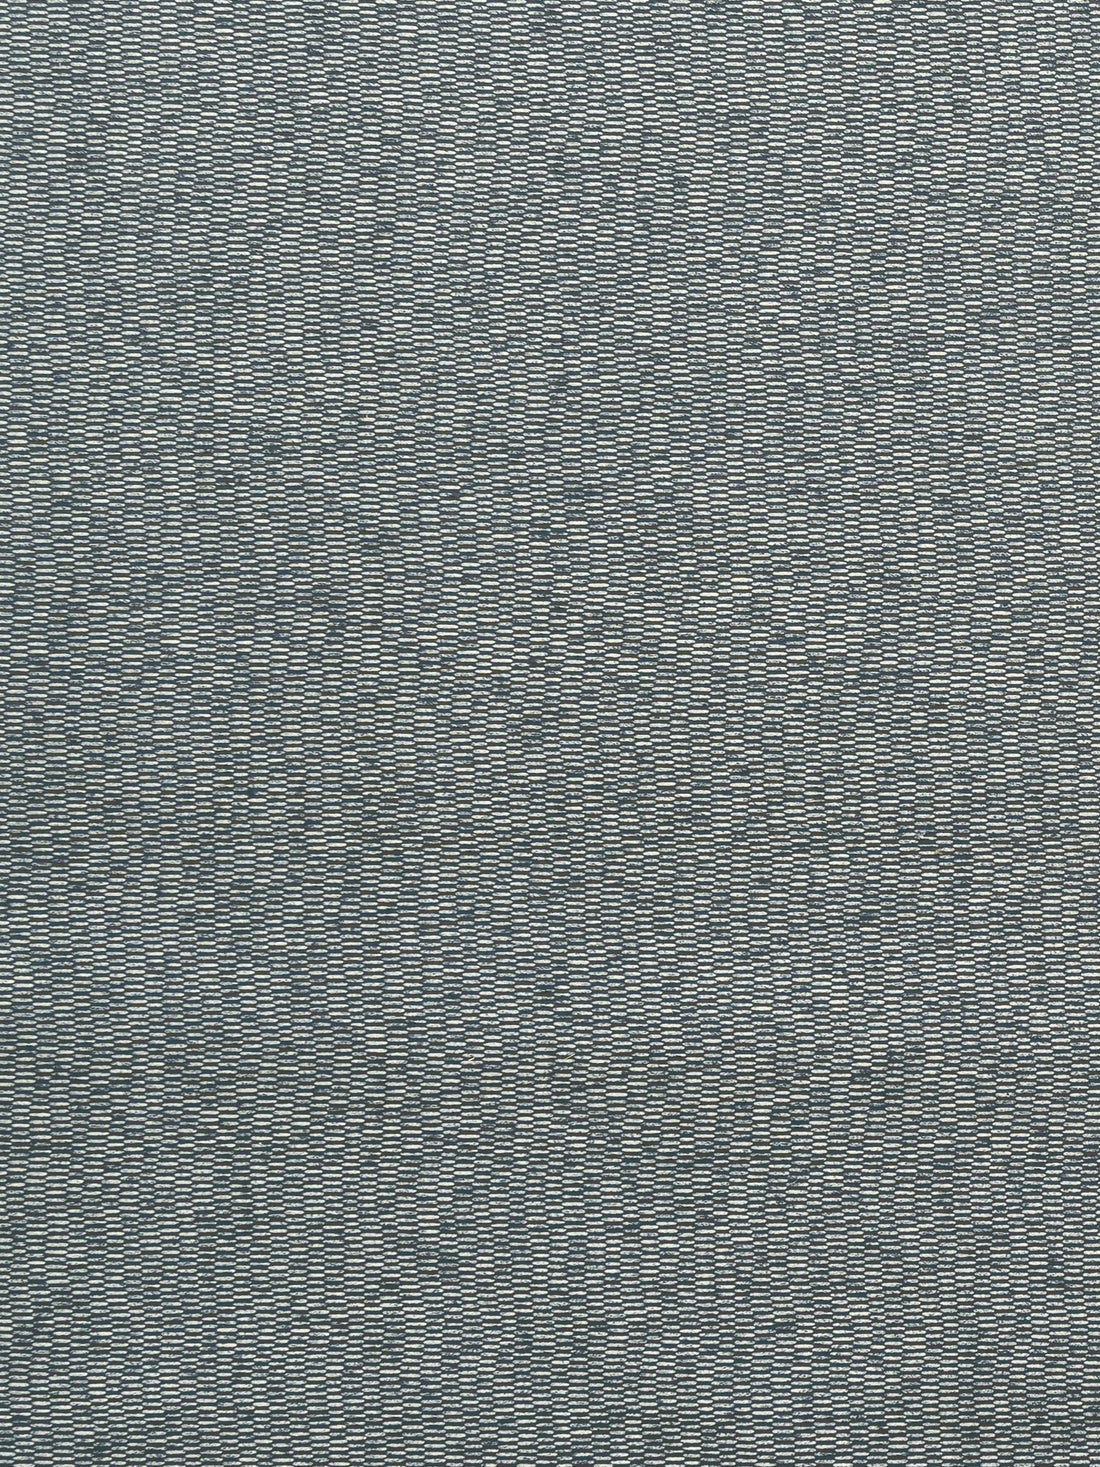 Raine Weave fabric in graphite color - pattern number GW 000427224 - by Scalamandre in the Grey Watkins collection